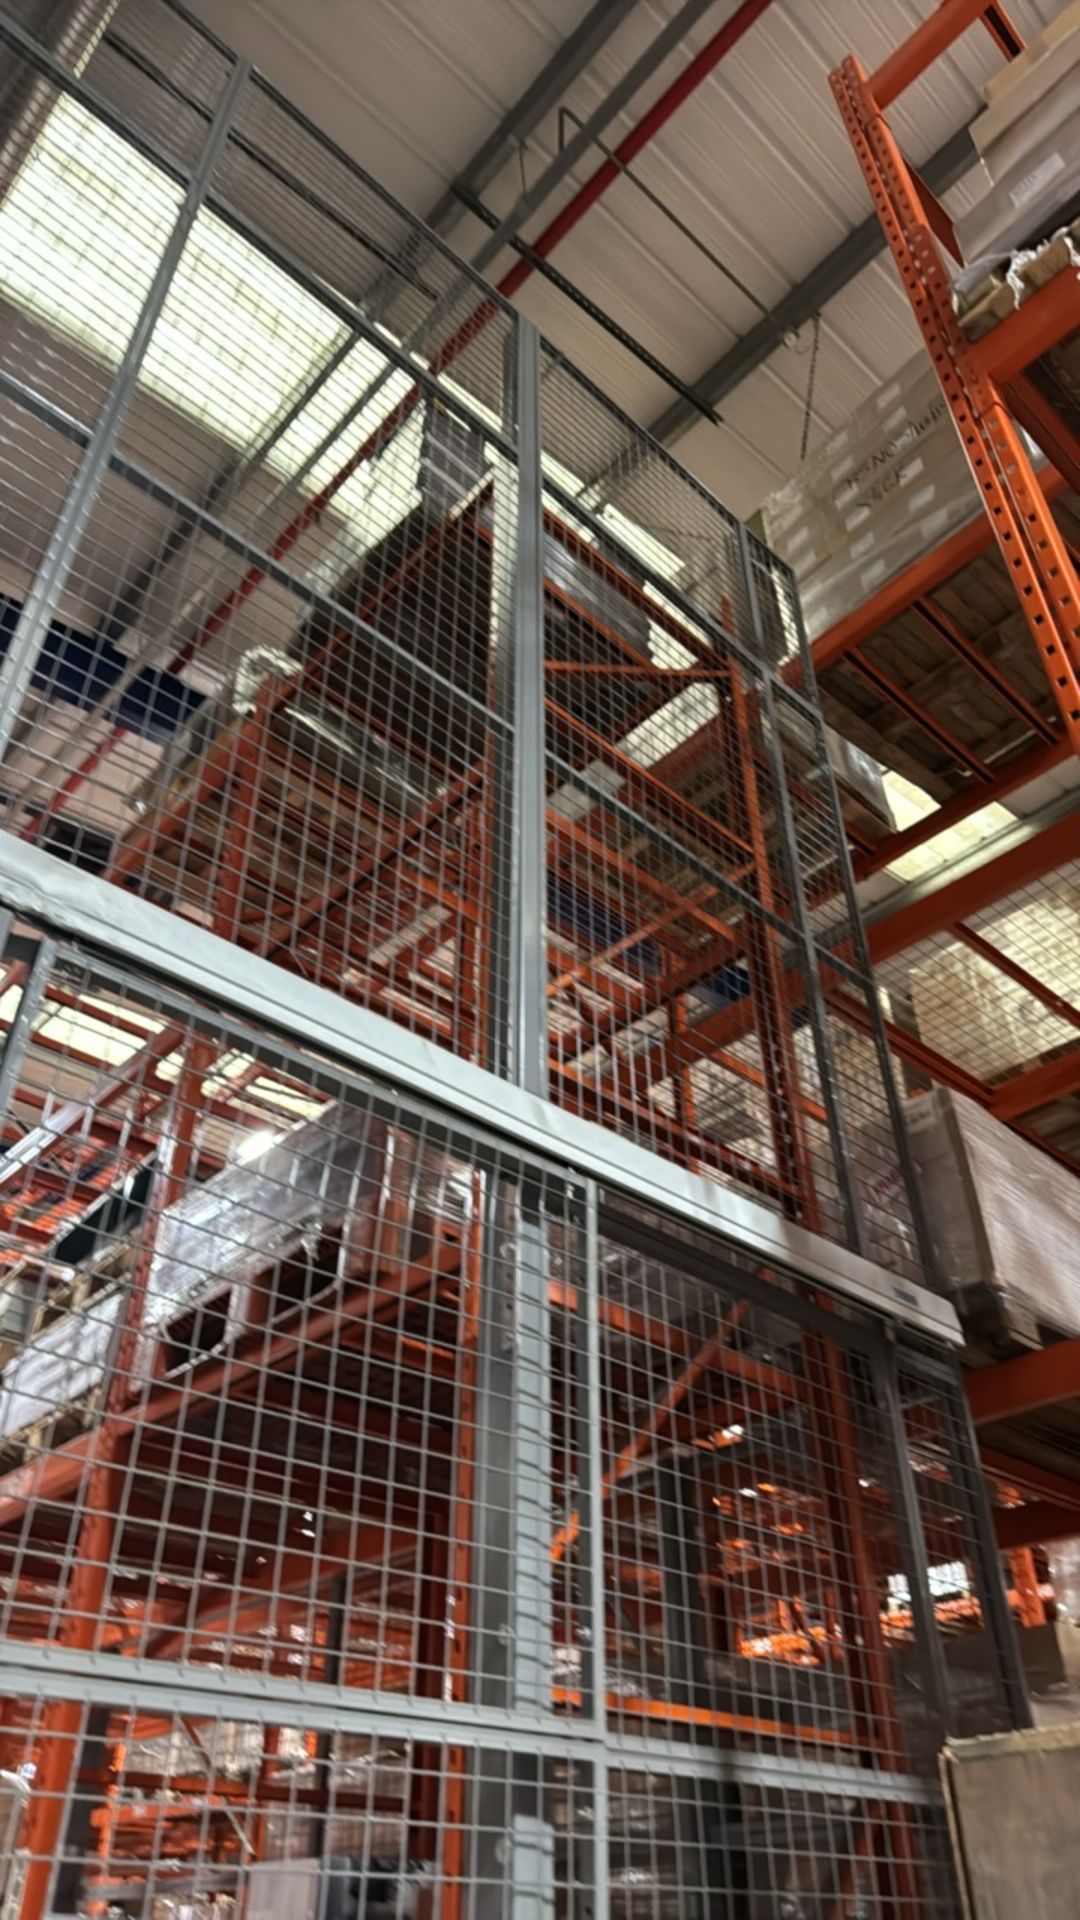 ref 23 - Metal Cage Wall - Image 4 of 6